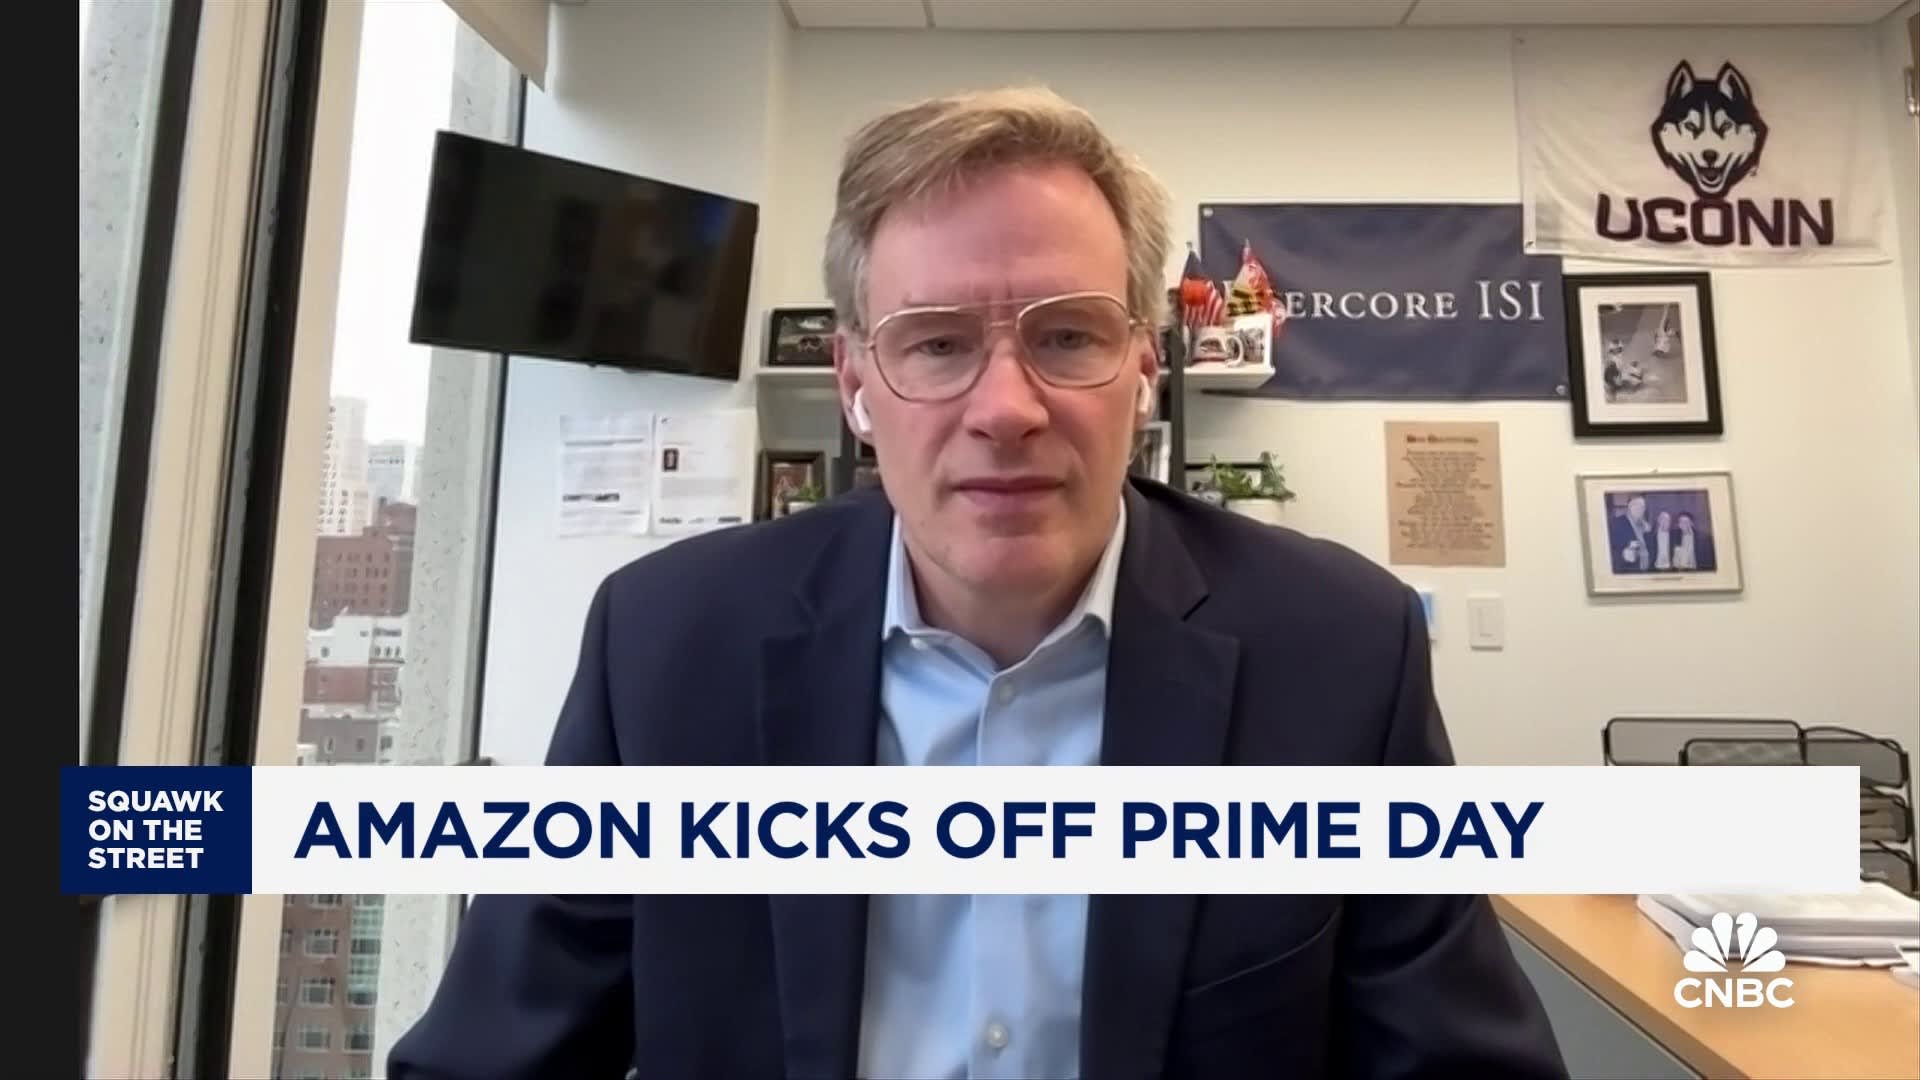 Prime Day is a big marketing event for Amazon, says Evercore ISI's Mark Mahaney